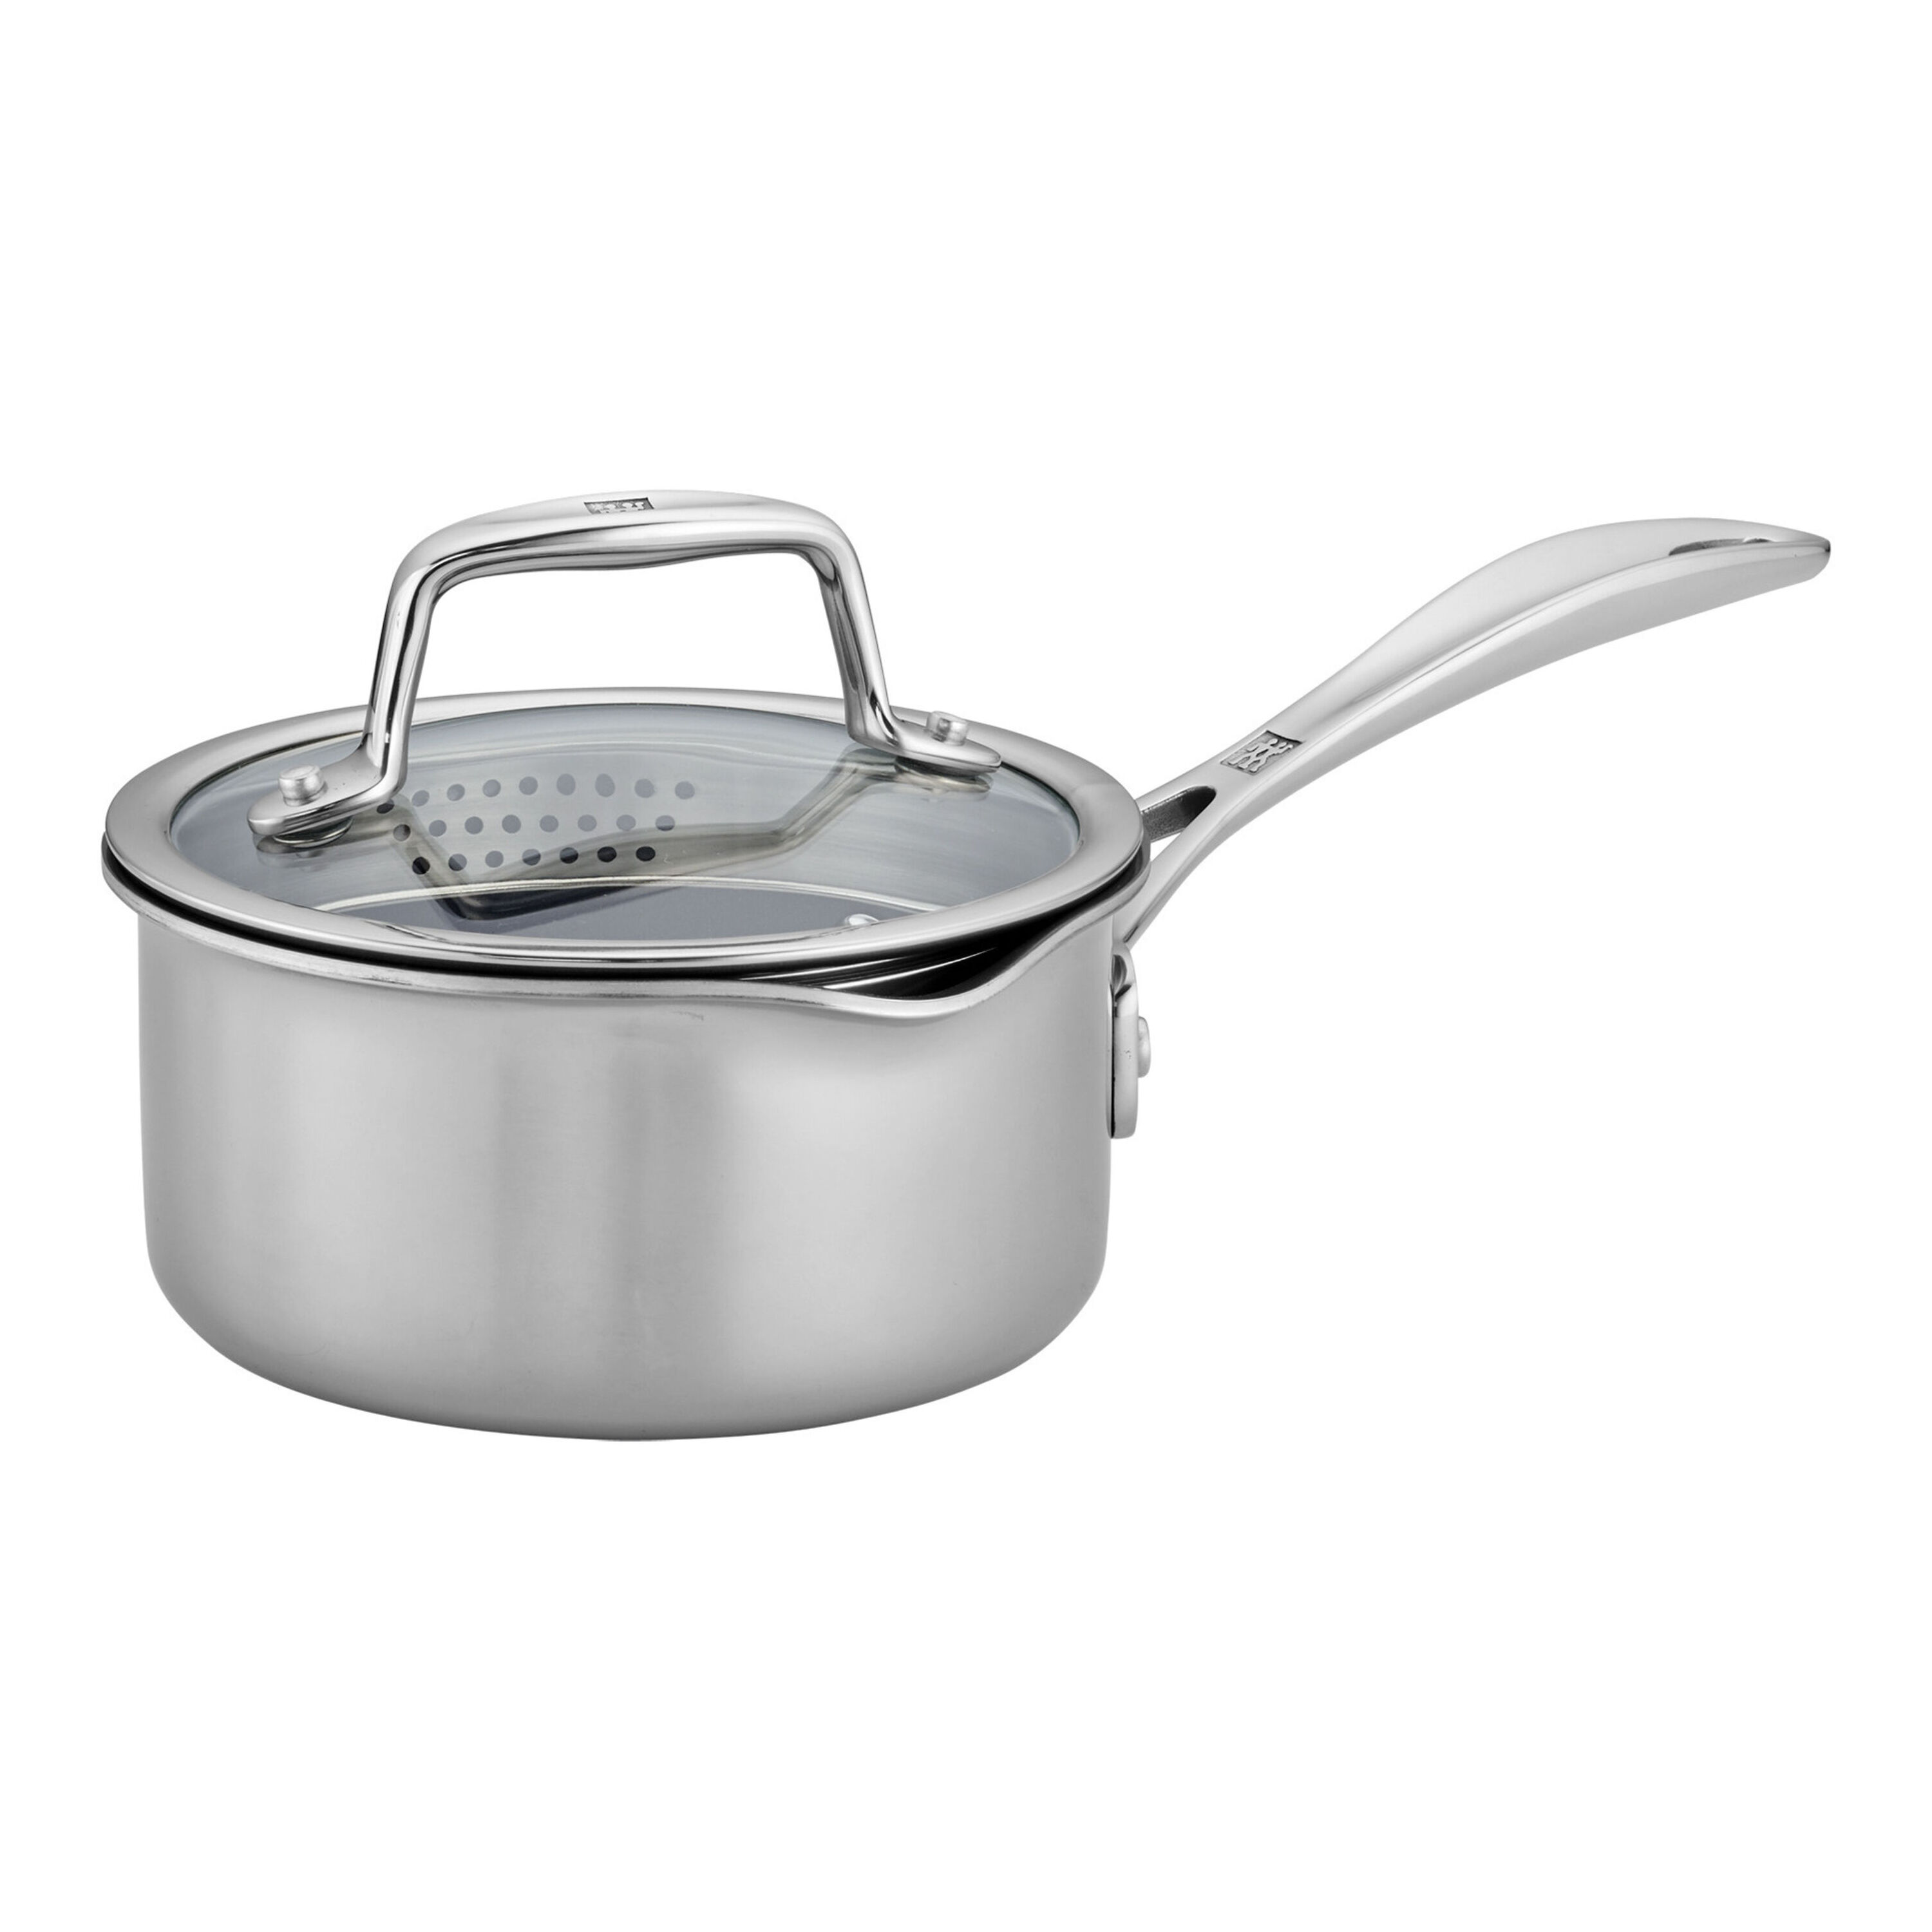 ZWILLING Commercial 9-qt Stainless Steel Sauce Pot without a Lid